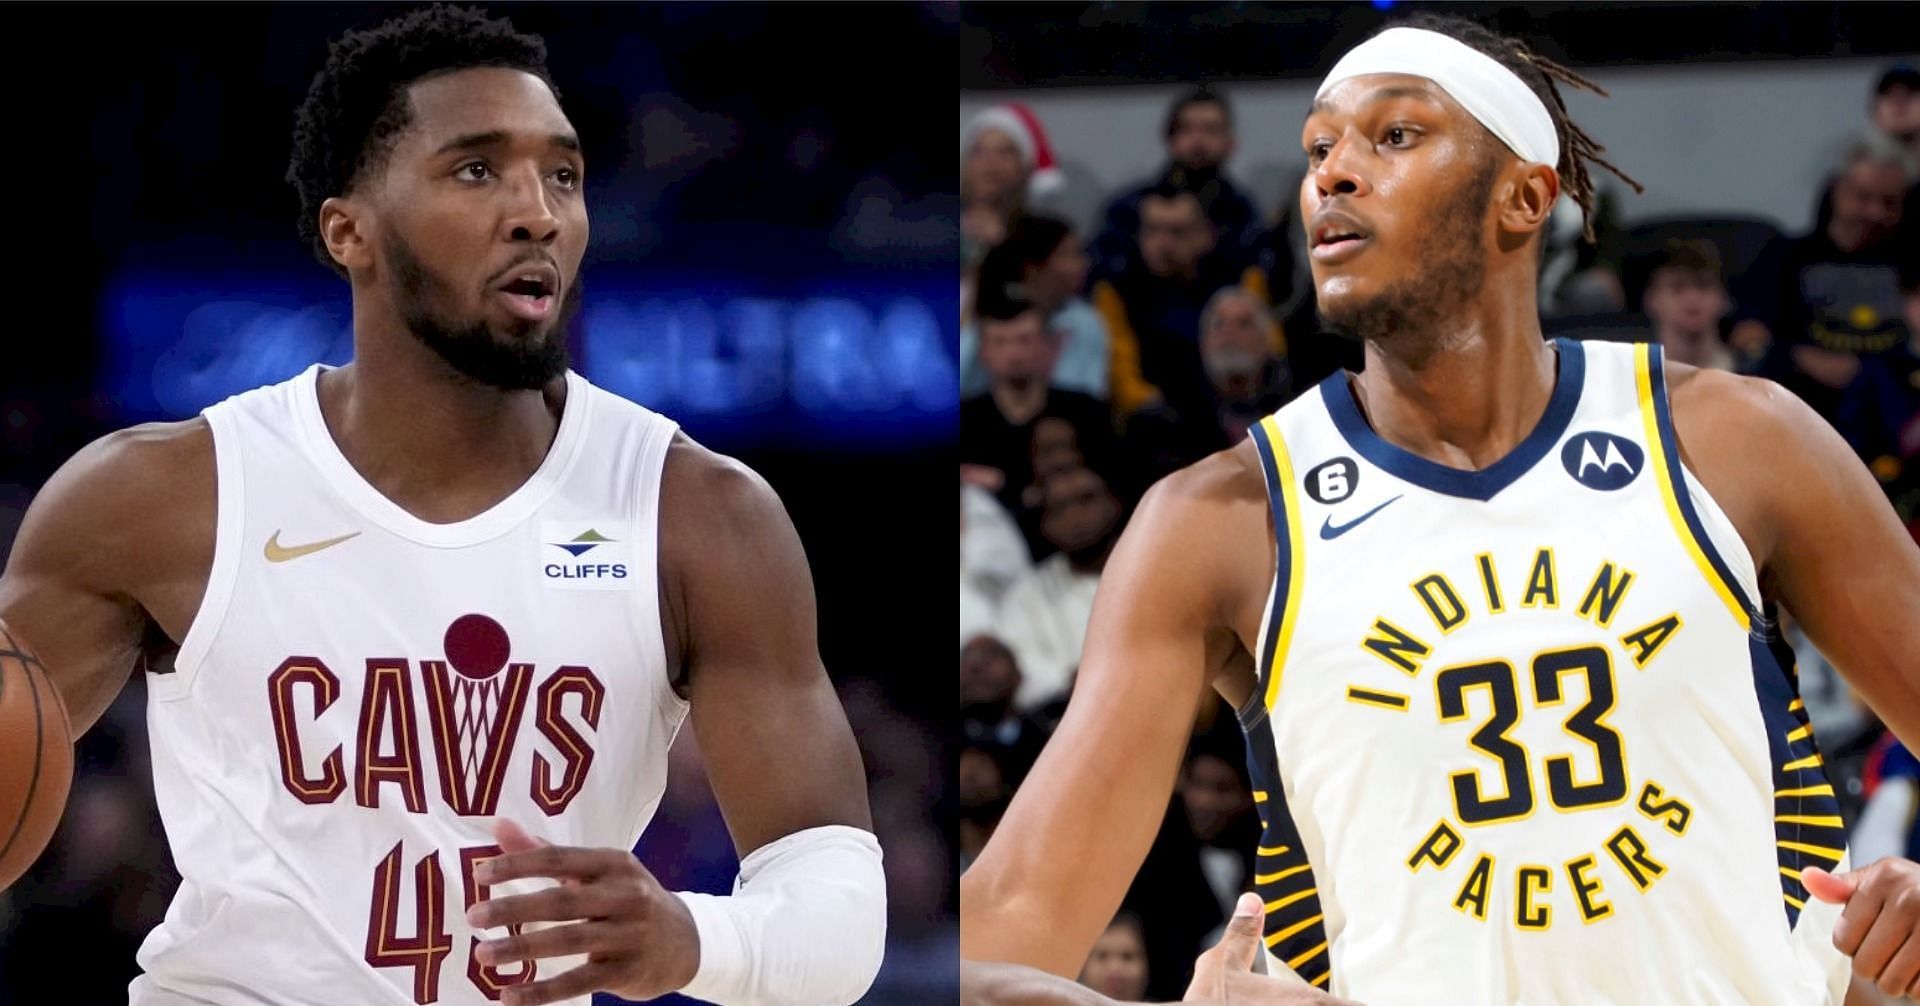 Cleveland Cavaliers star shooting guard Donovan Mitchell and Indiana Pacers center Myles Turner